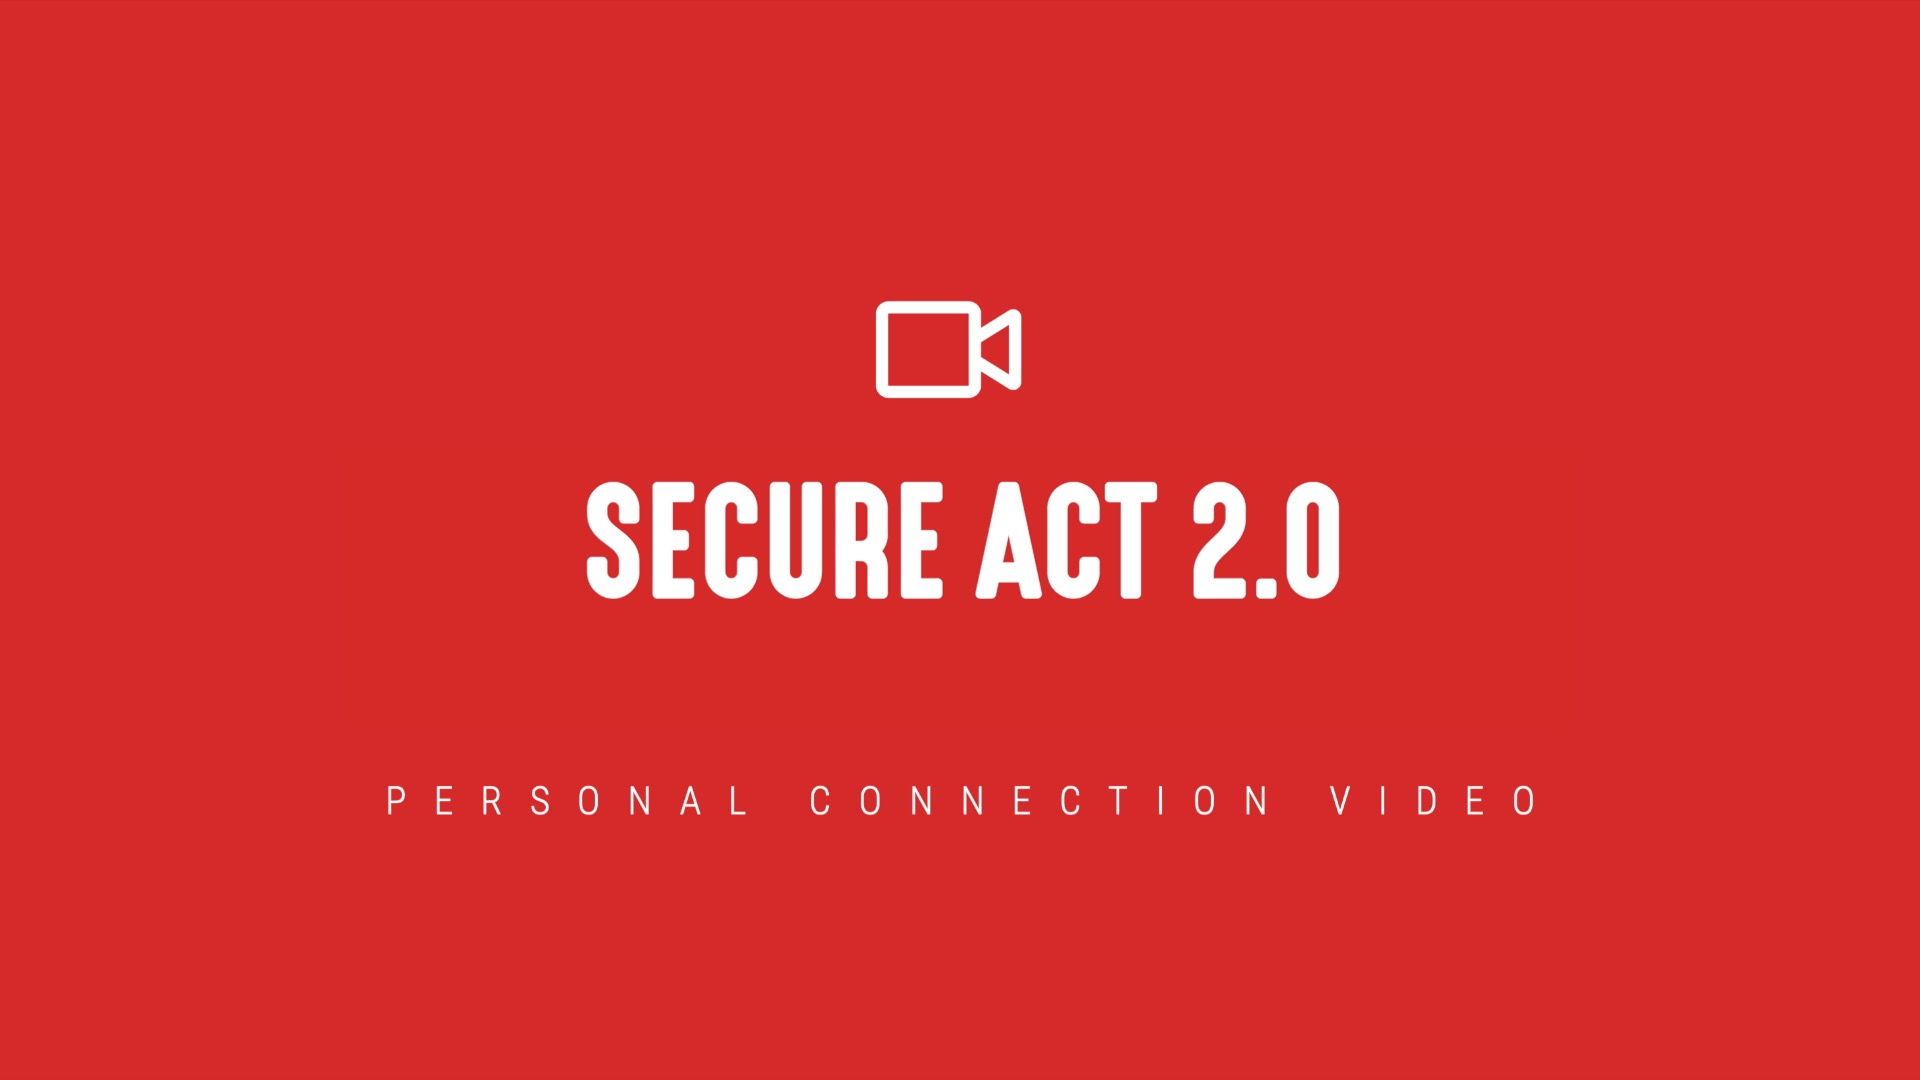 [NEW] SECURE Act 2.0 - Personal Connection Videos